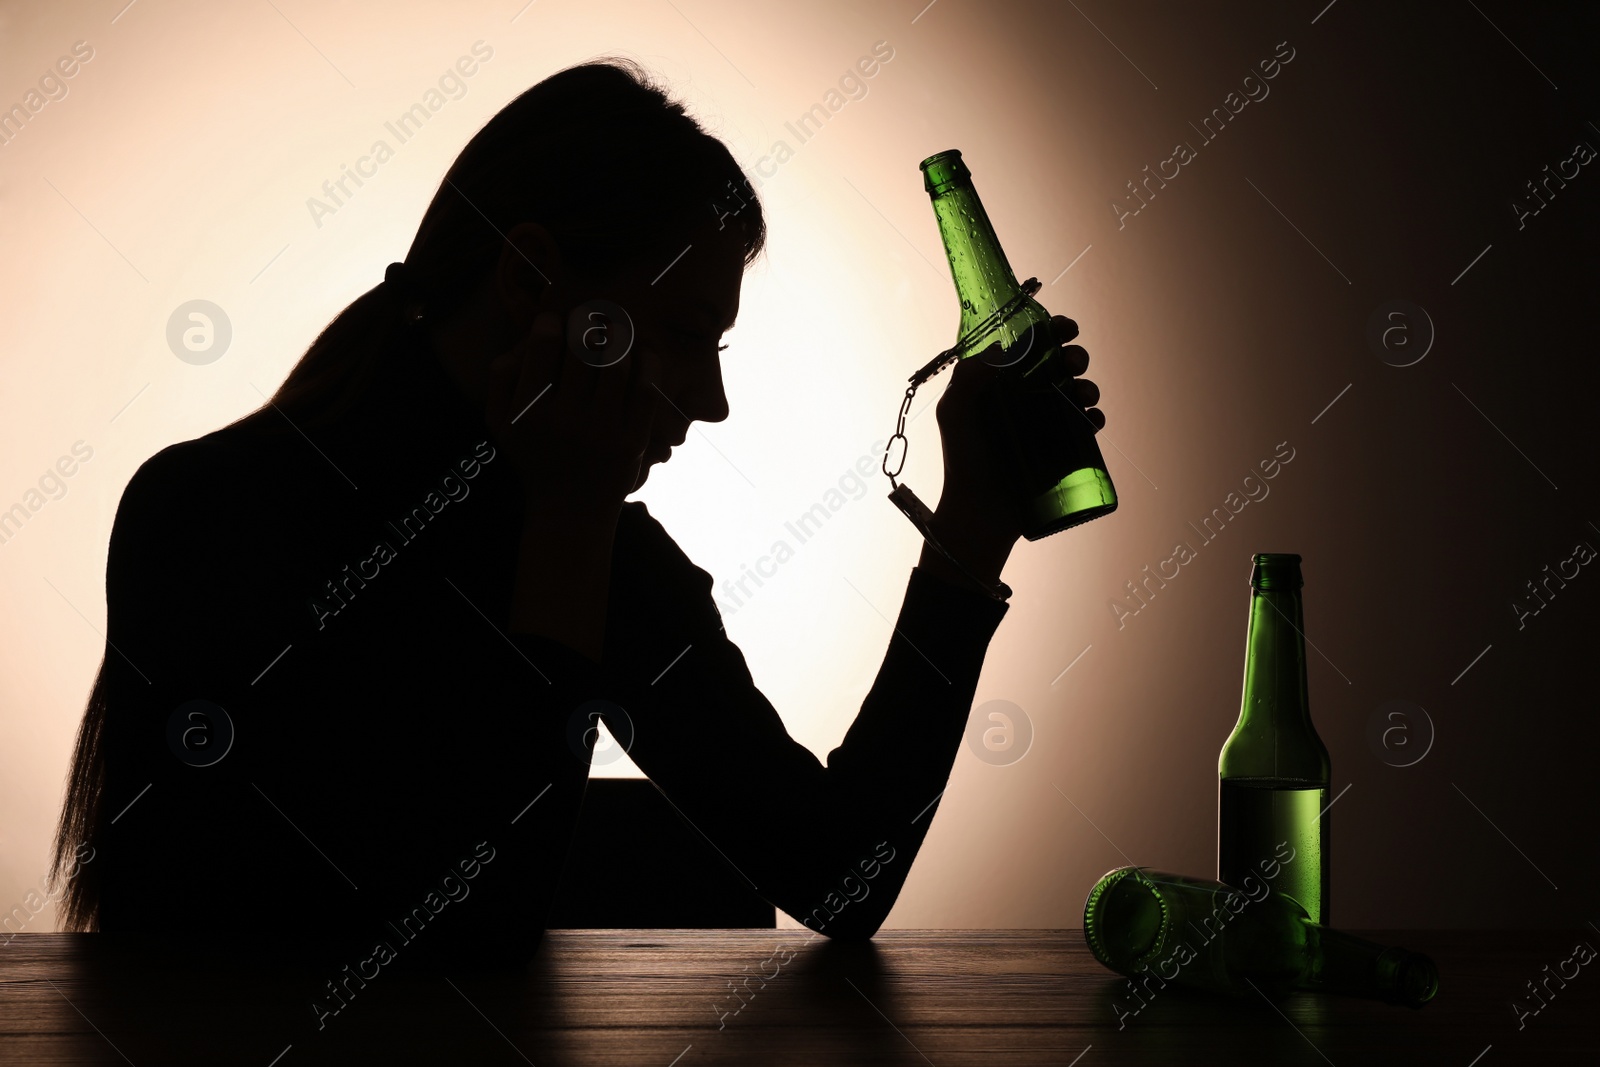 Photo of Alcohol addiction. Silhouette of woman handcuffed with beer bottle at wooden table, backlit